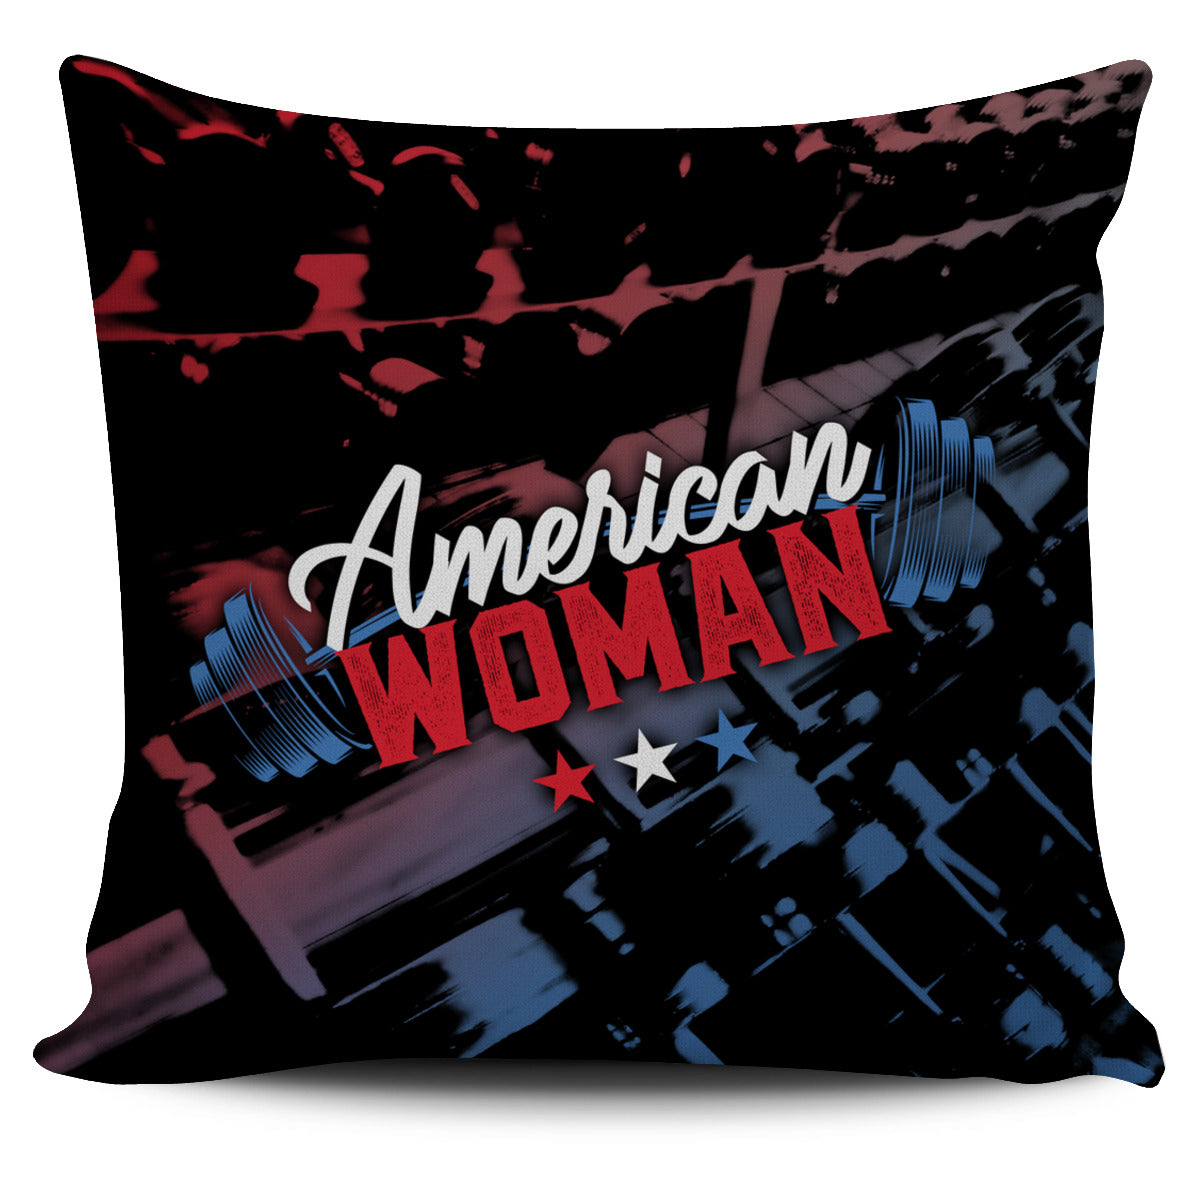 American Woman Pillow Cover